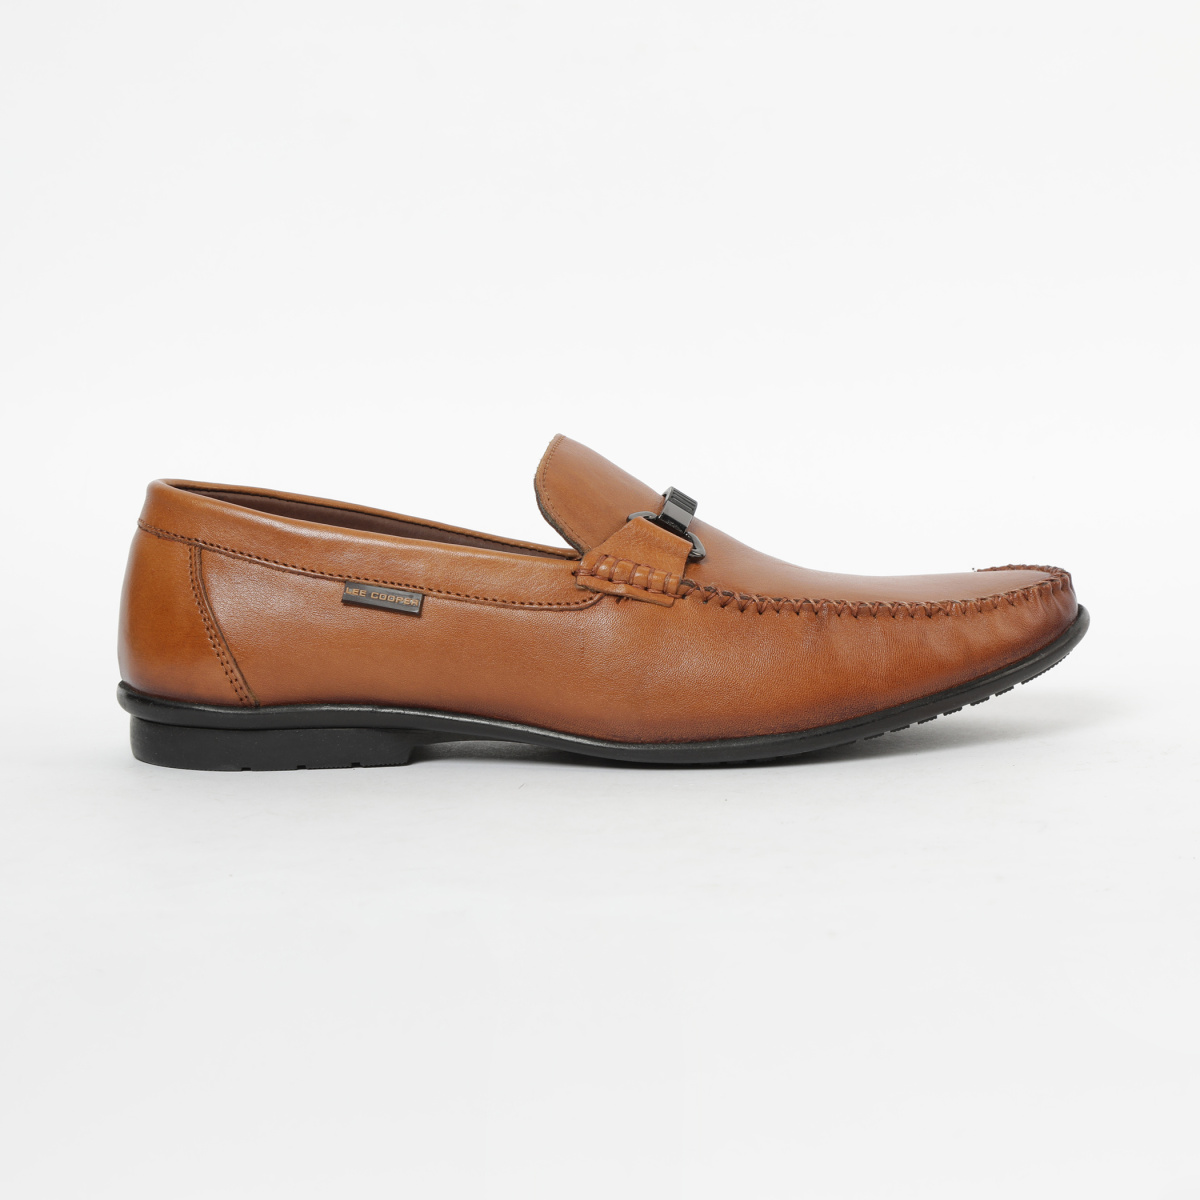 LEE COOPER Genuine Leather Textured Bit Loafers